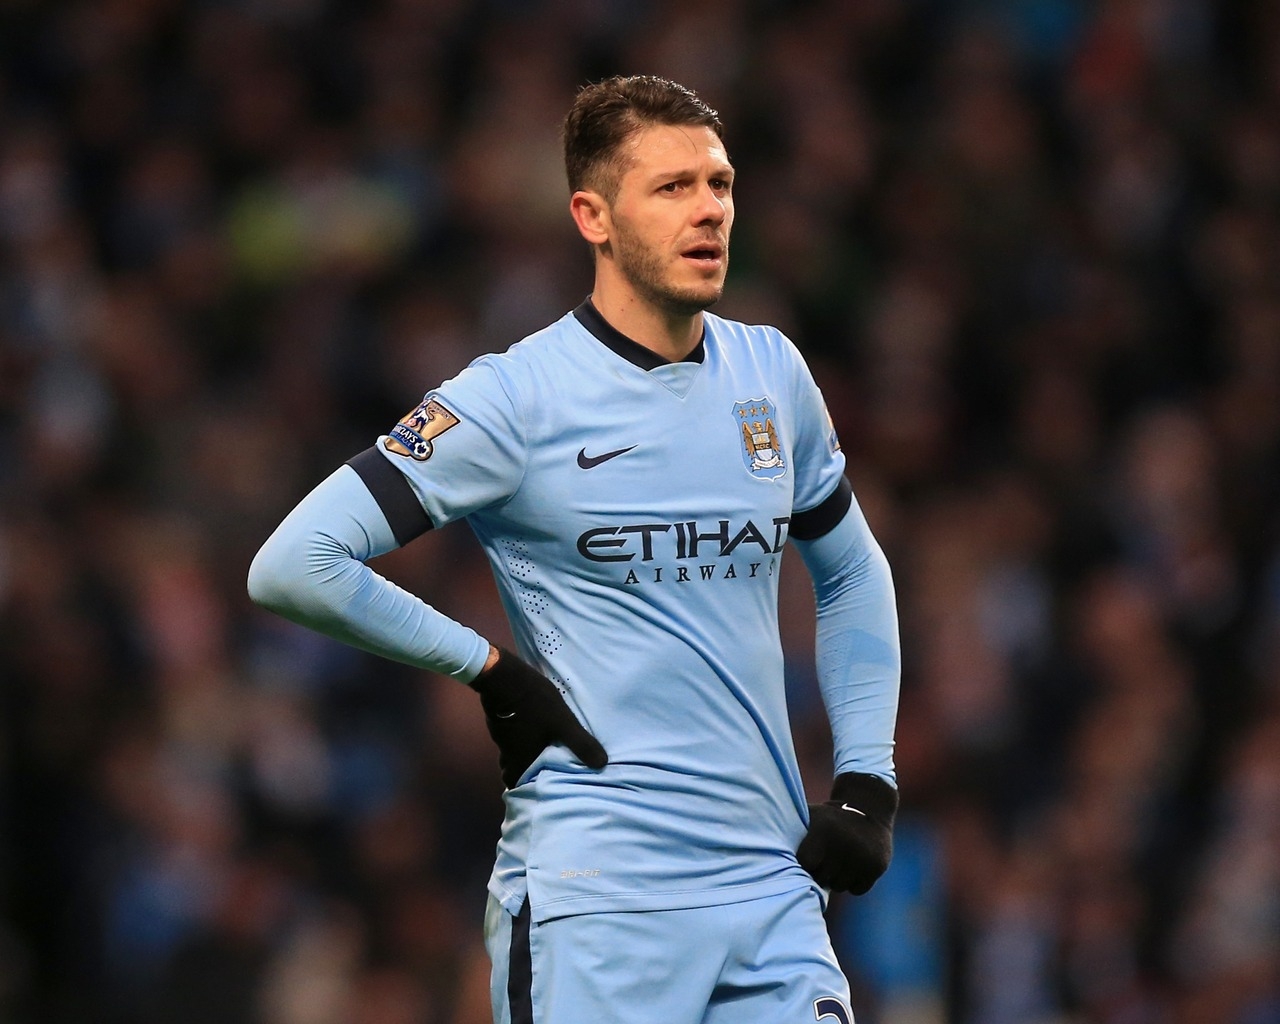 Martin Demichelis Football Player for 1280 x 1024 resolution